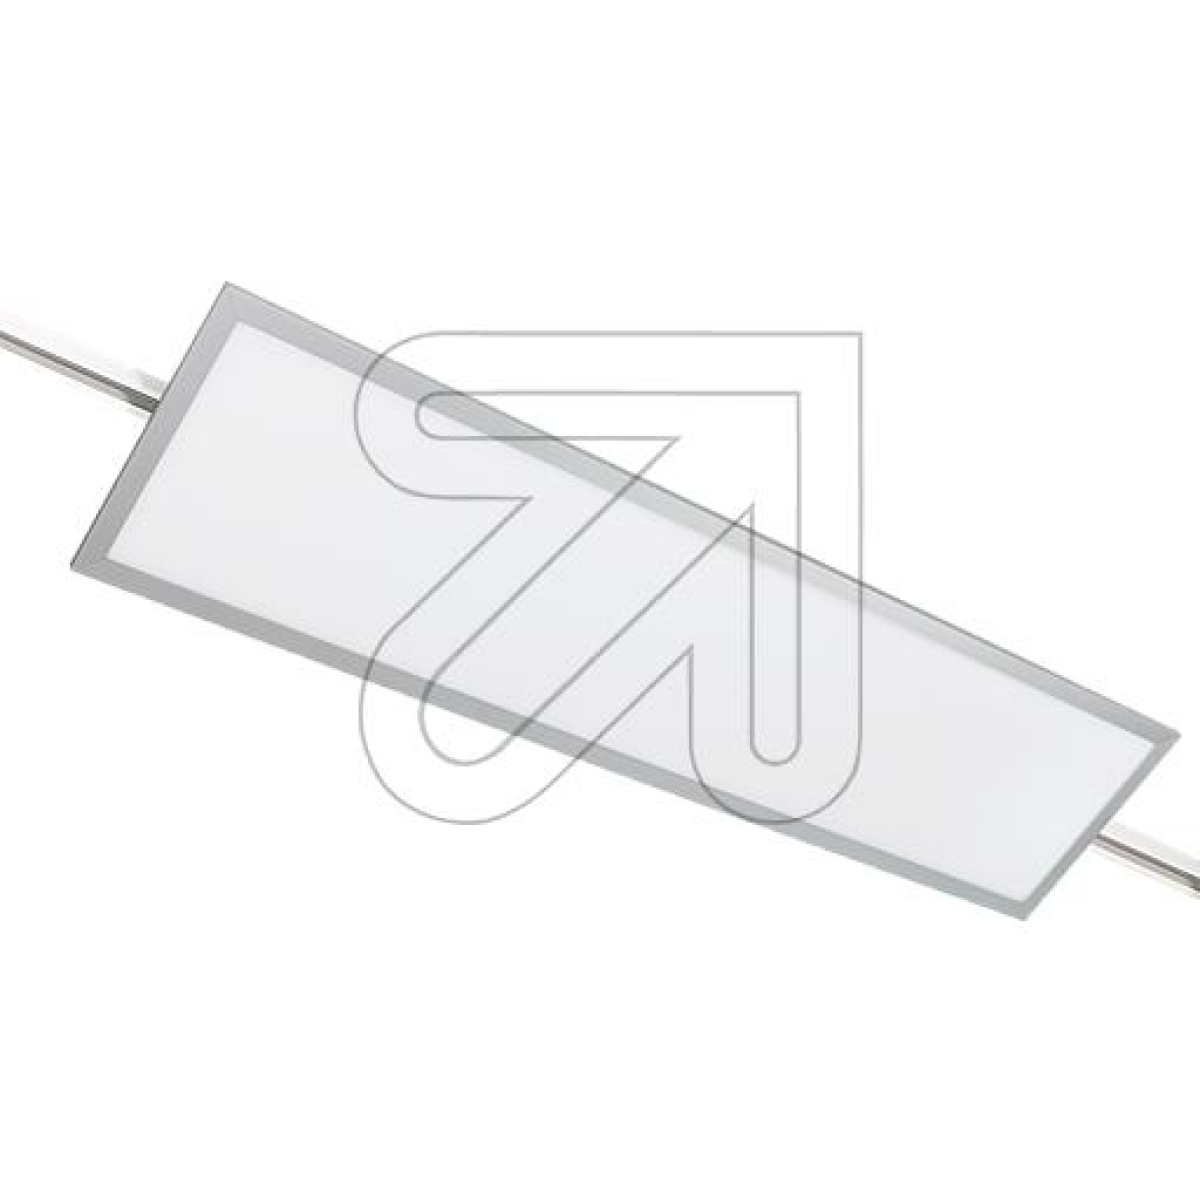 Licht 20003-phase LED panel #1200x300mm, 40W 3000K, silver 60232Article-No: 673995